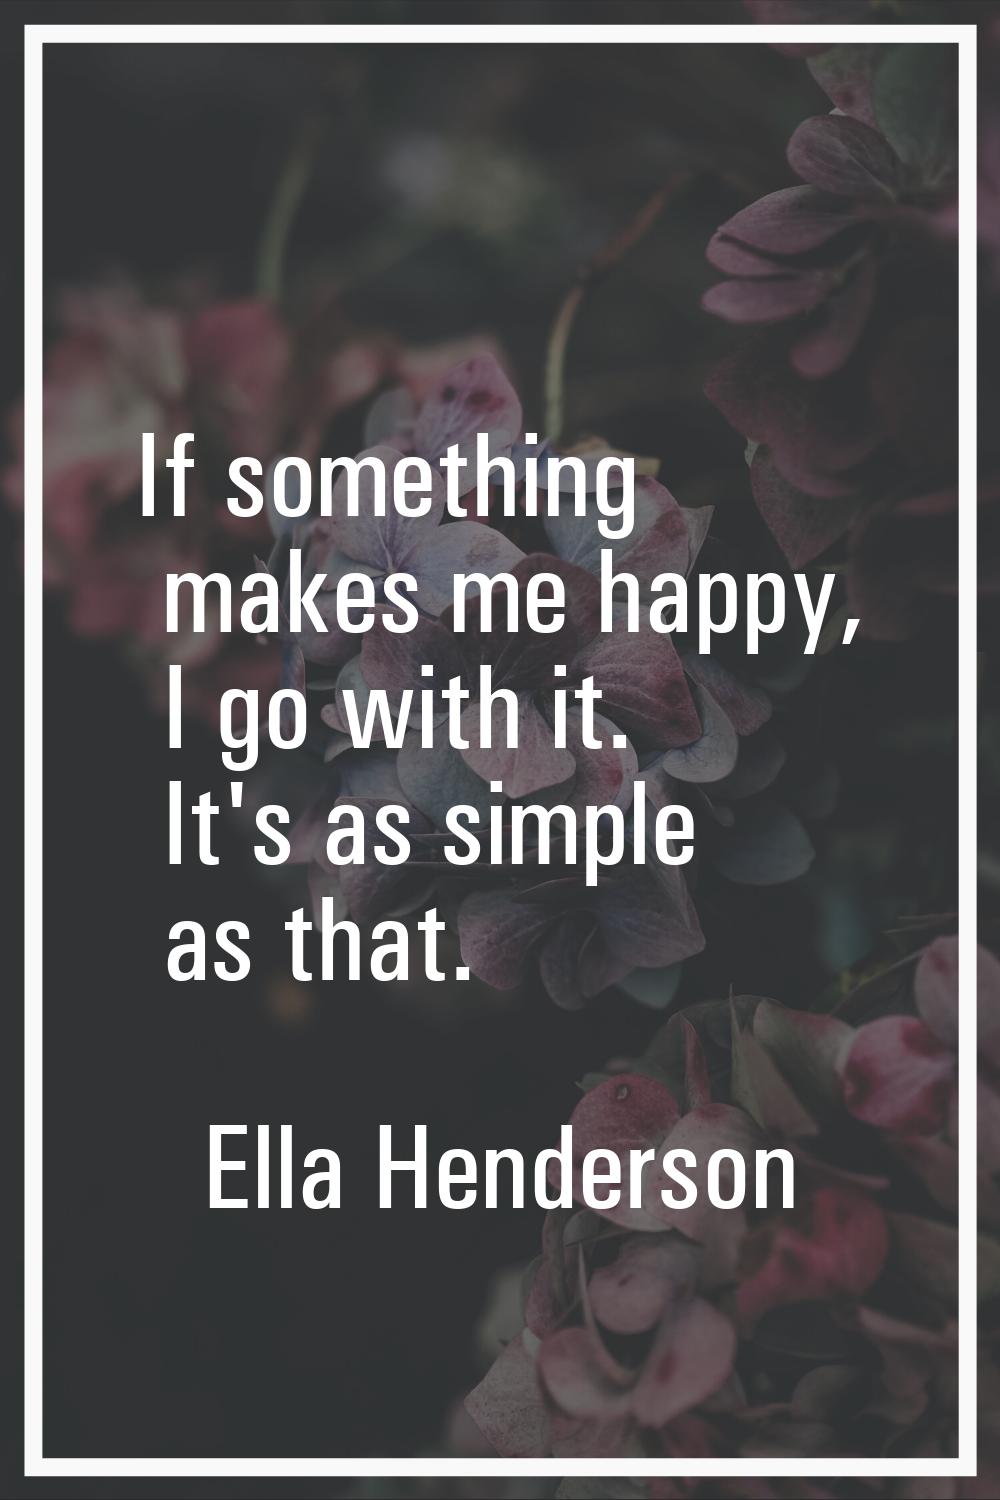 If something makes me happy, I go with it. It's as simple as that.